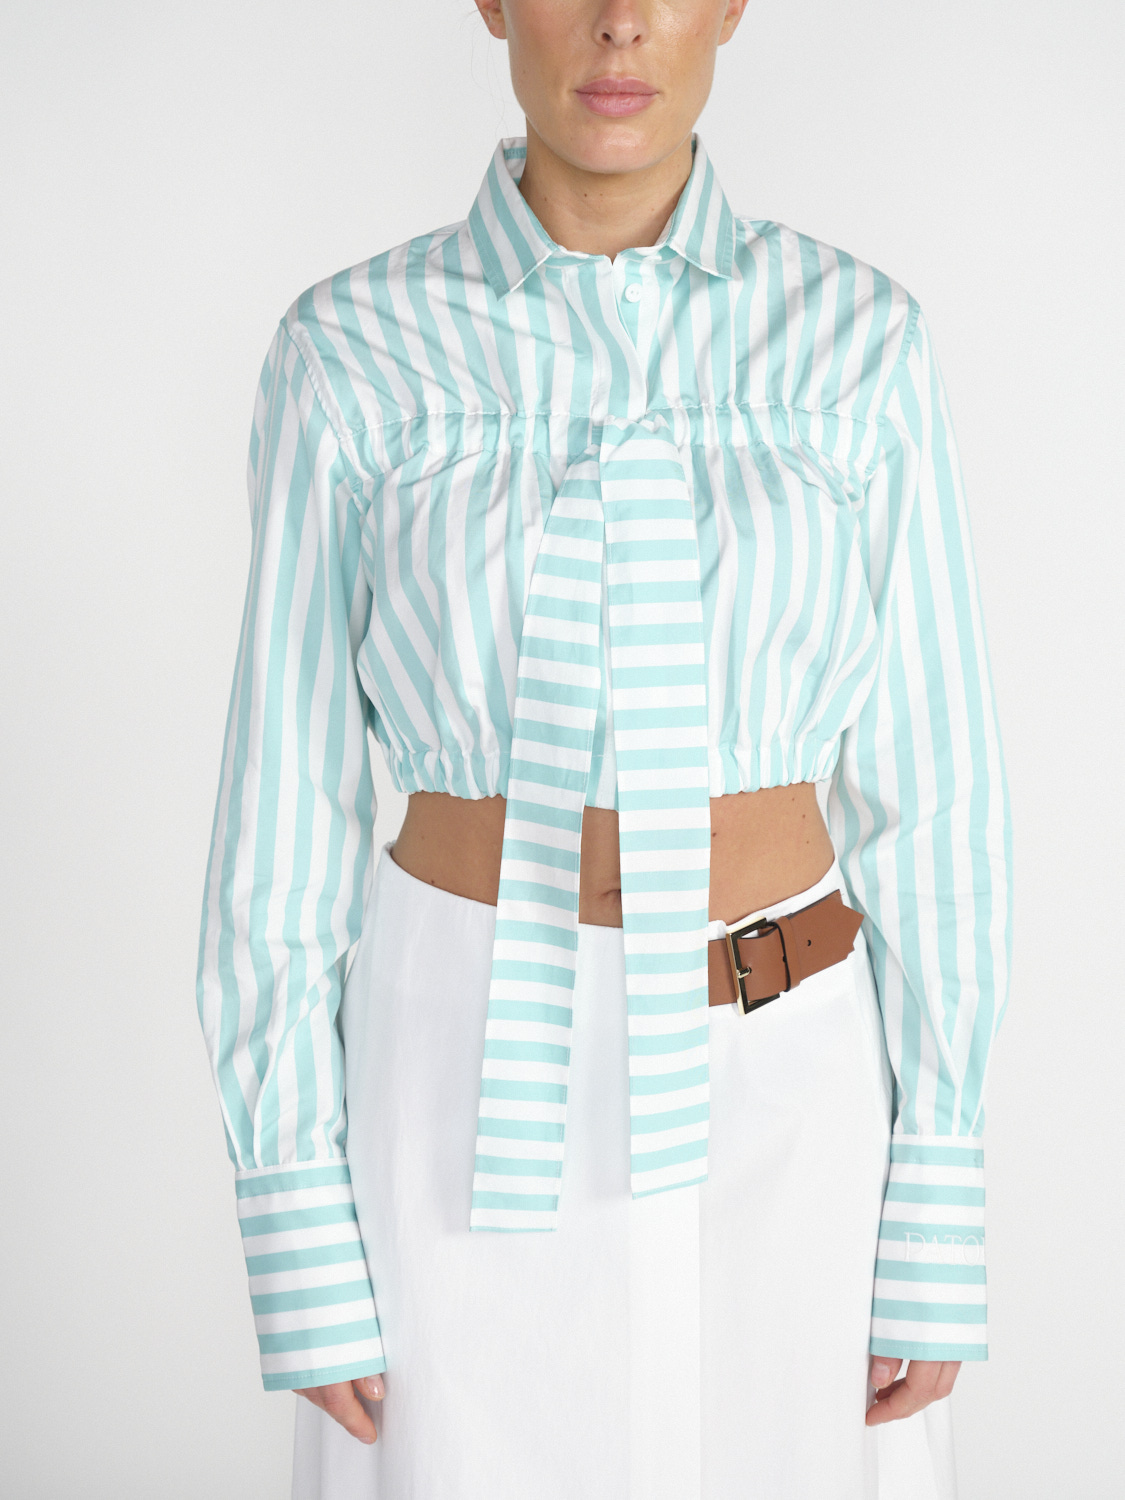 Patou Cropped bow shirt – Gecroppte Baumwoll-Bluse mint 36